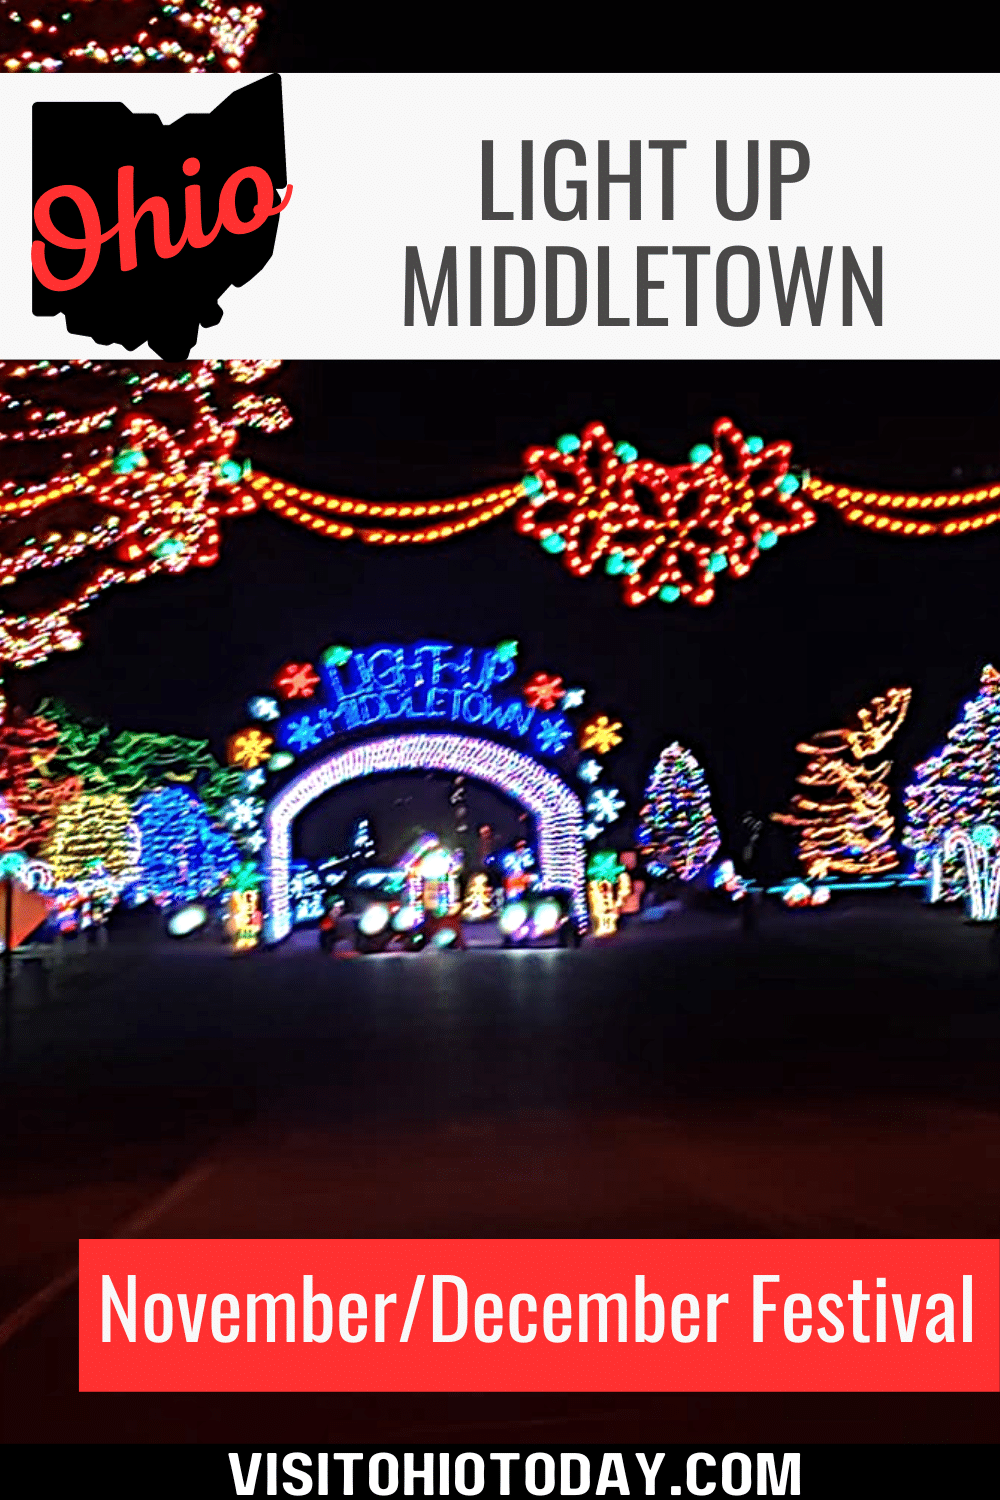 Light Up Middletown is a remarkable drive through fantasy light display that opens nightly starting on Thanksgiving going through New Year's Eve. The hours of the Fantasy Light Display are between 6:00 PM - 10:00 PM.